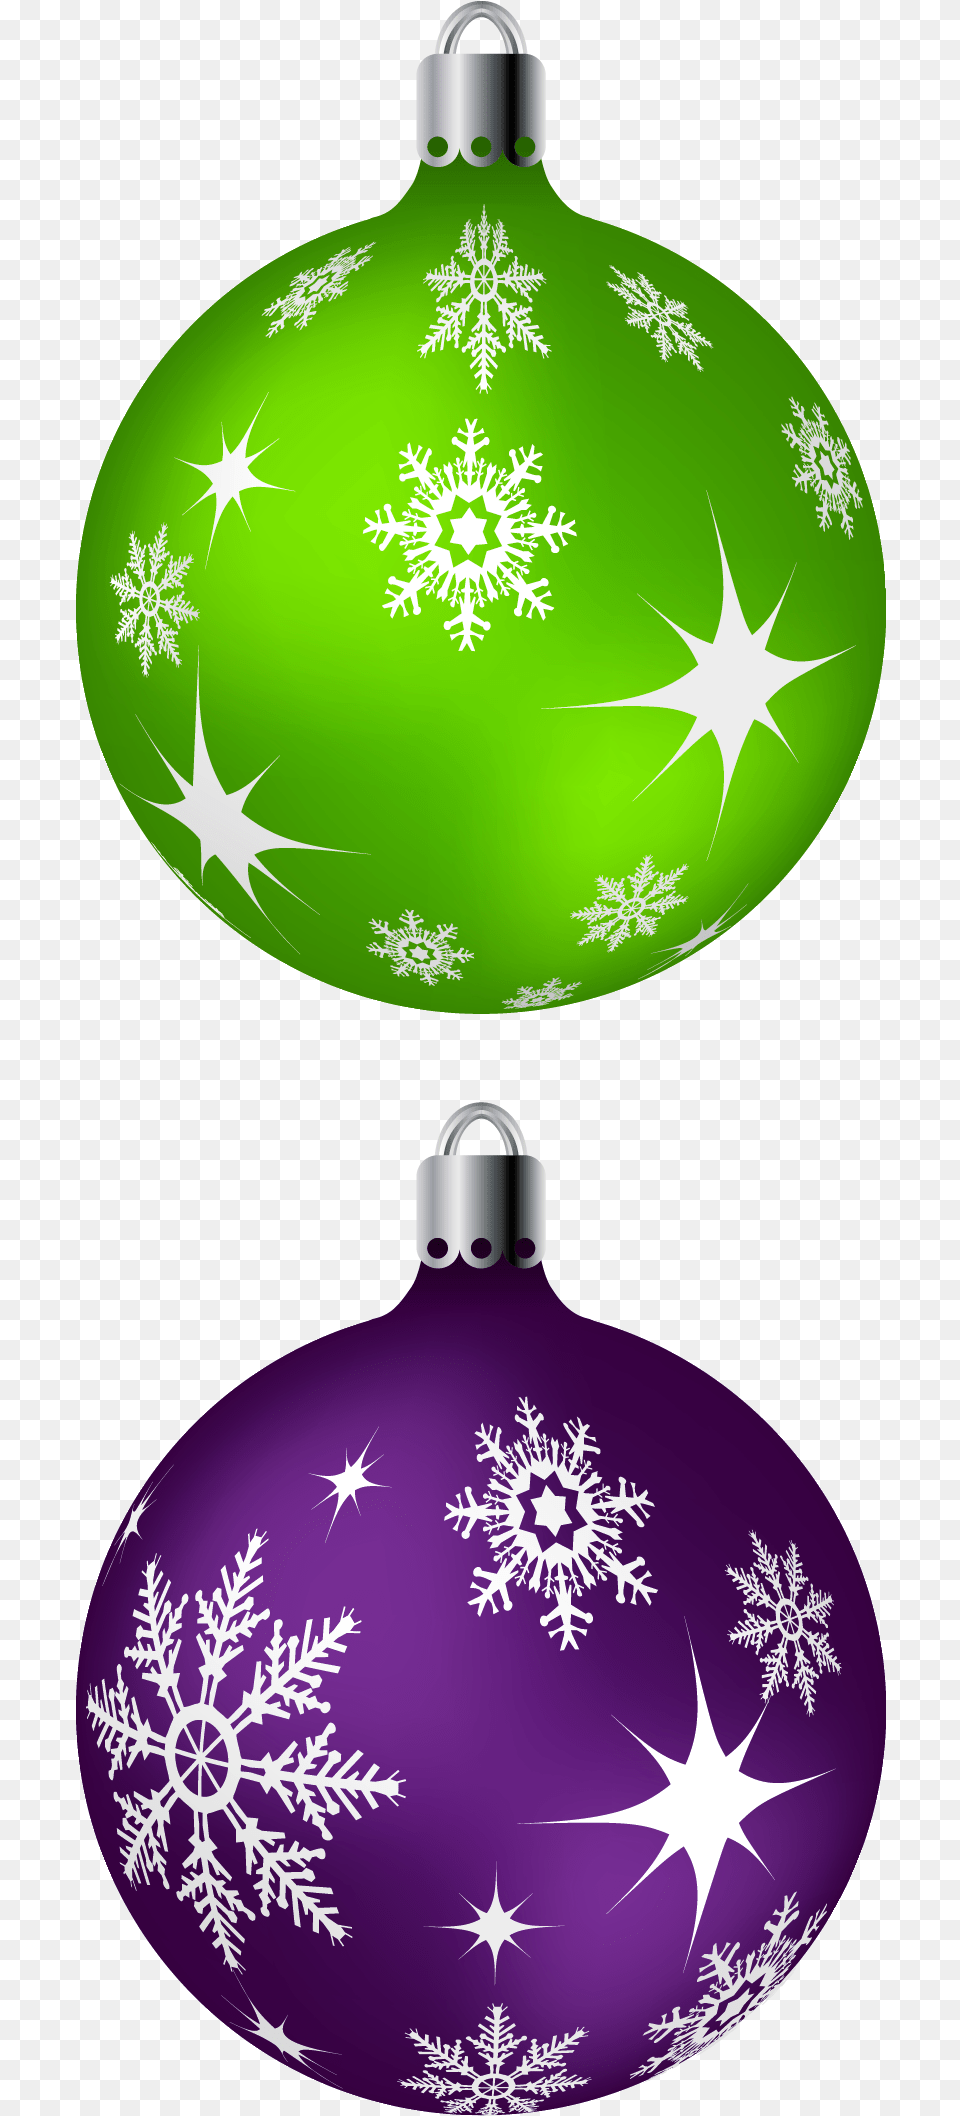 Green And Christmas Balls Christmas Tree Ornaments Cartoon, Accessories, Lighting, Ornament Free Transparent Png